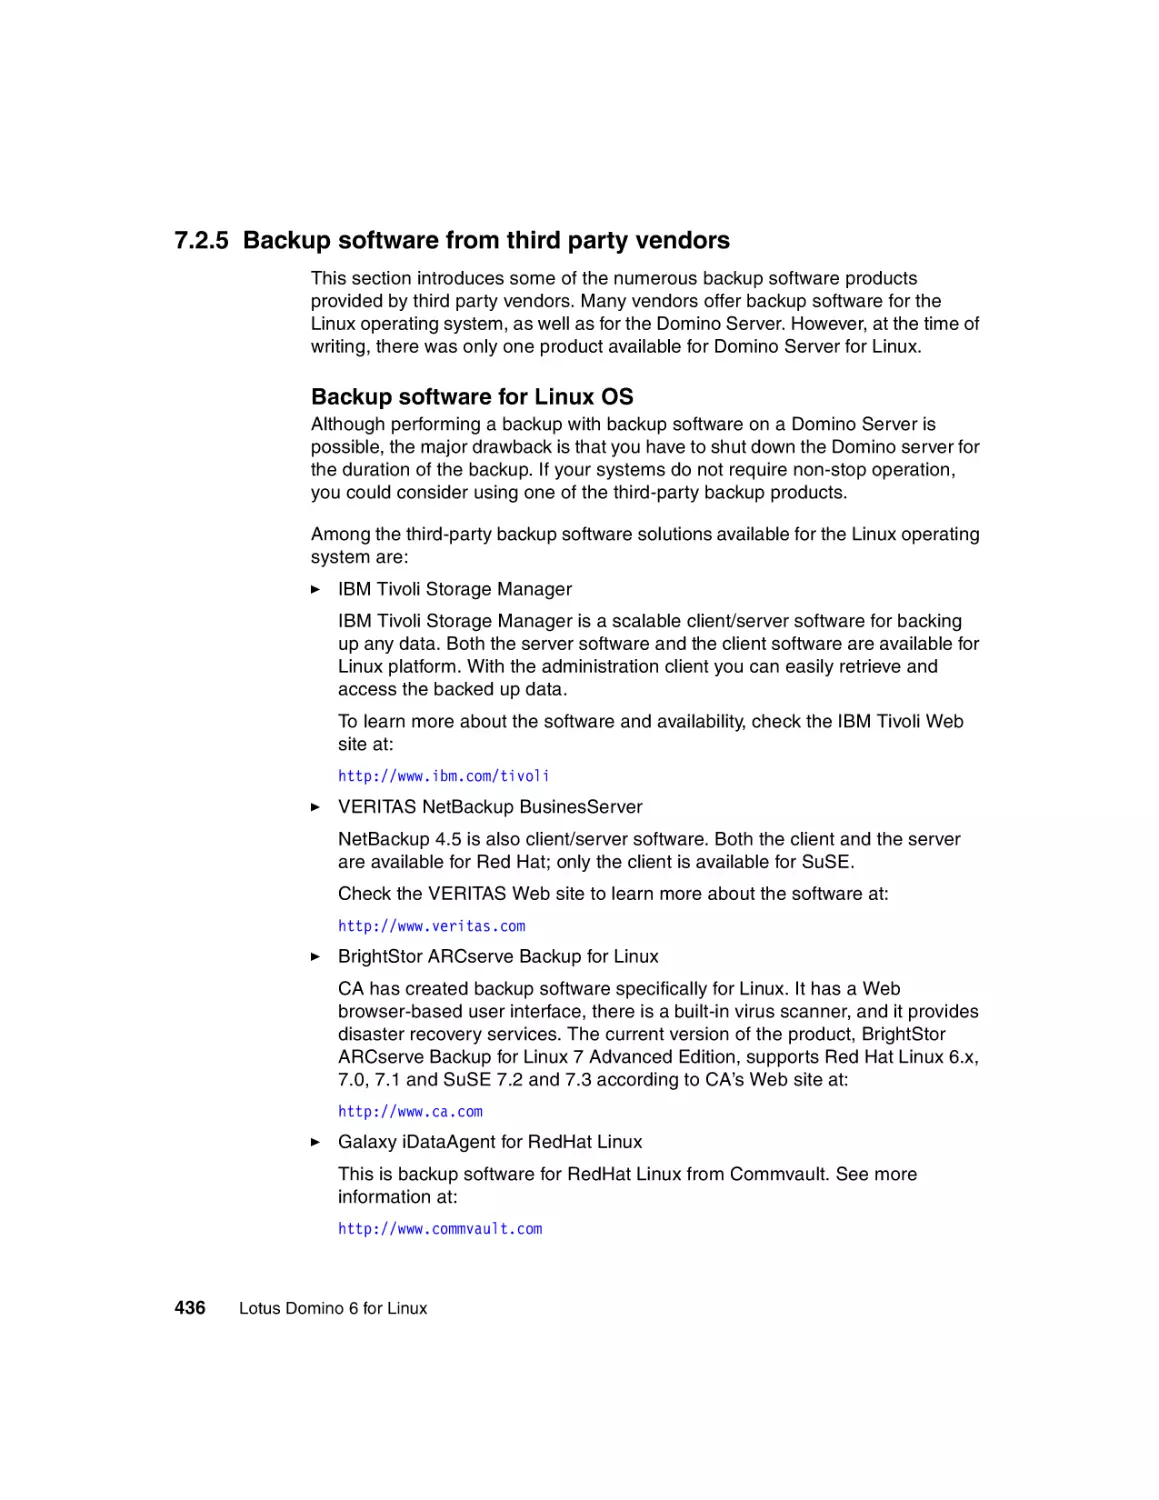 7.2.5 Backup software from third party vendors